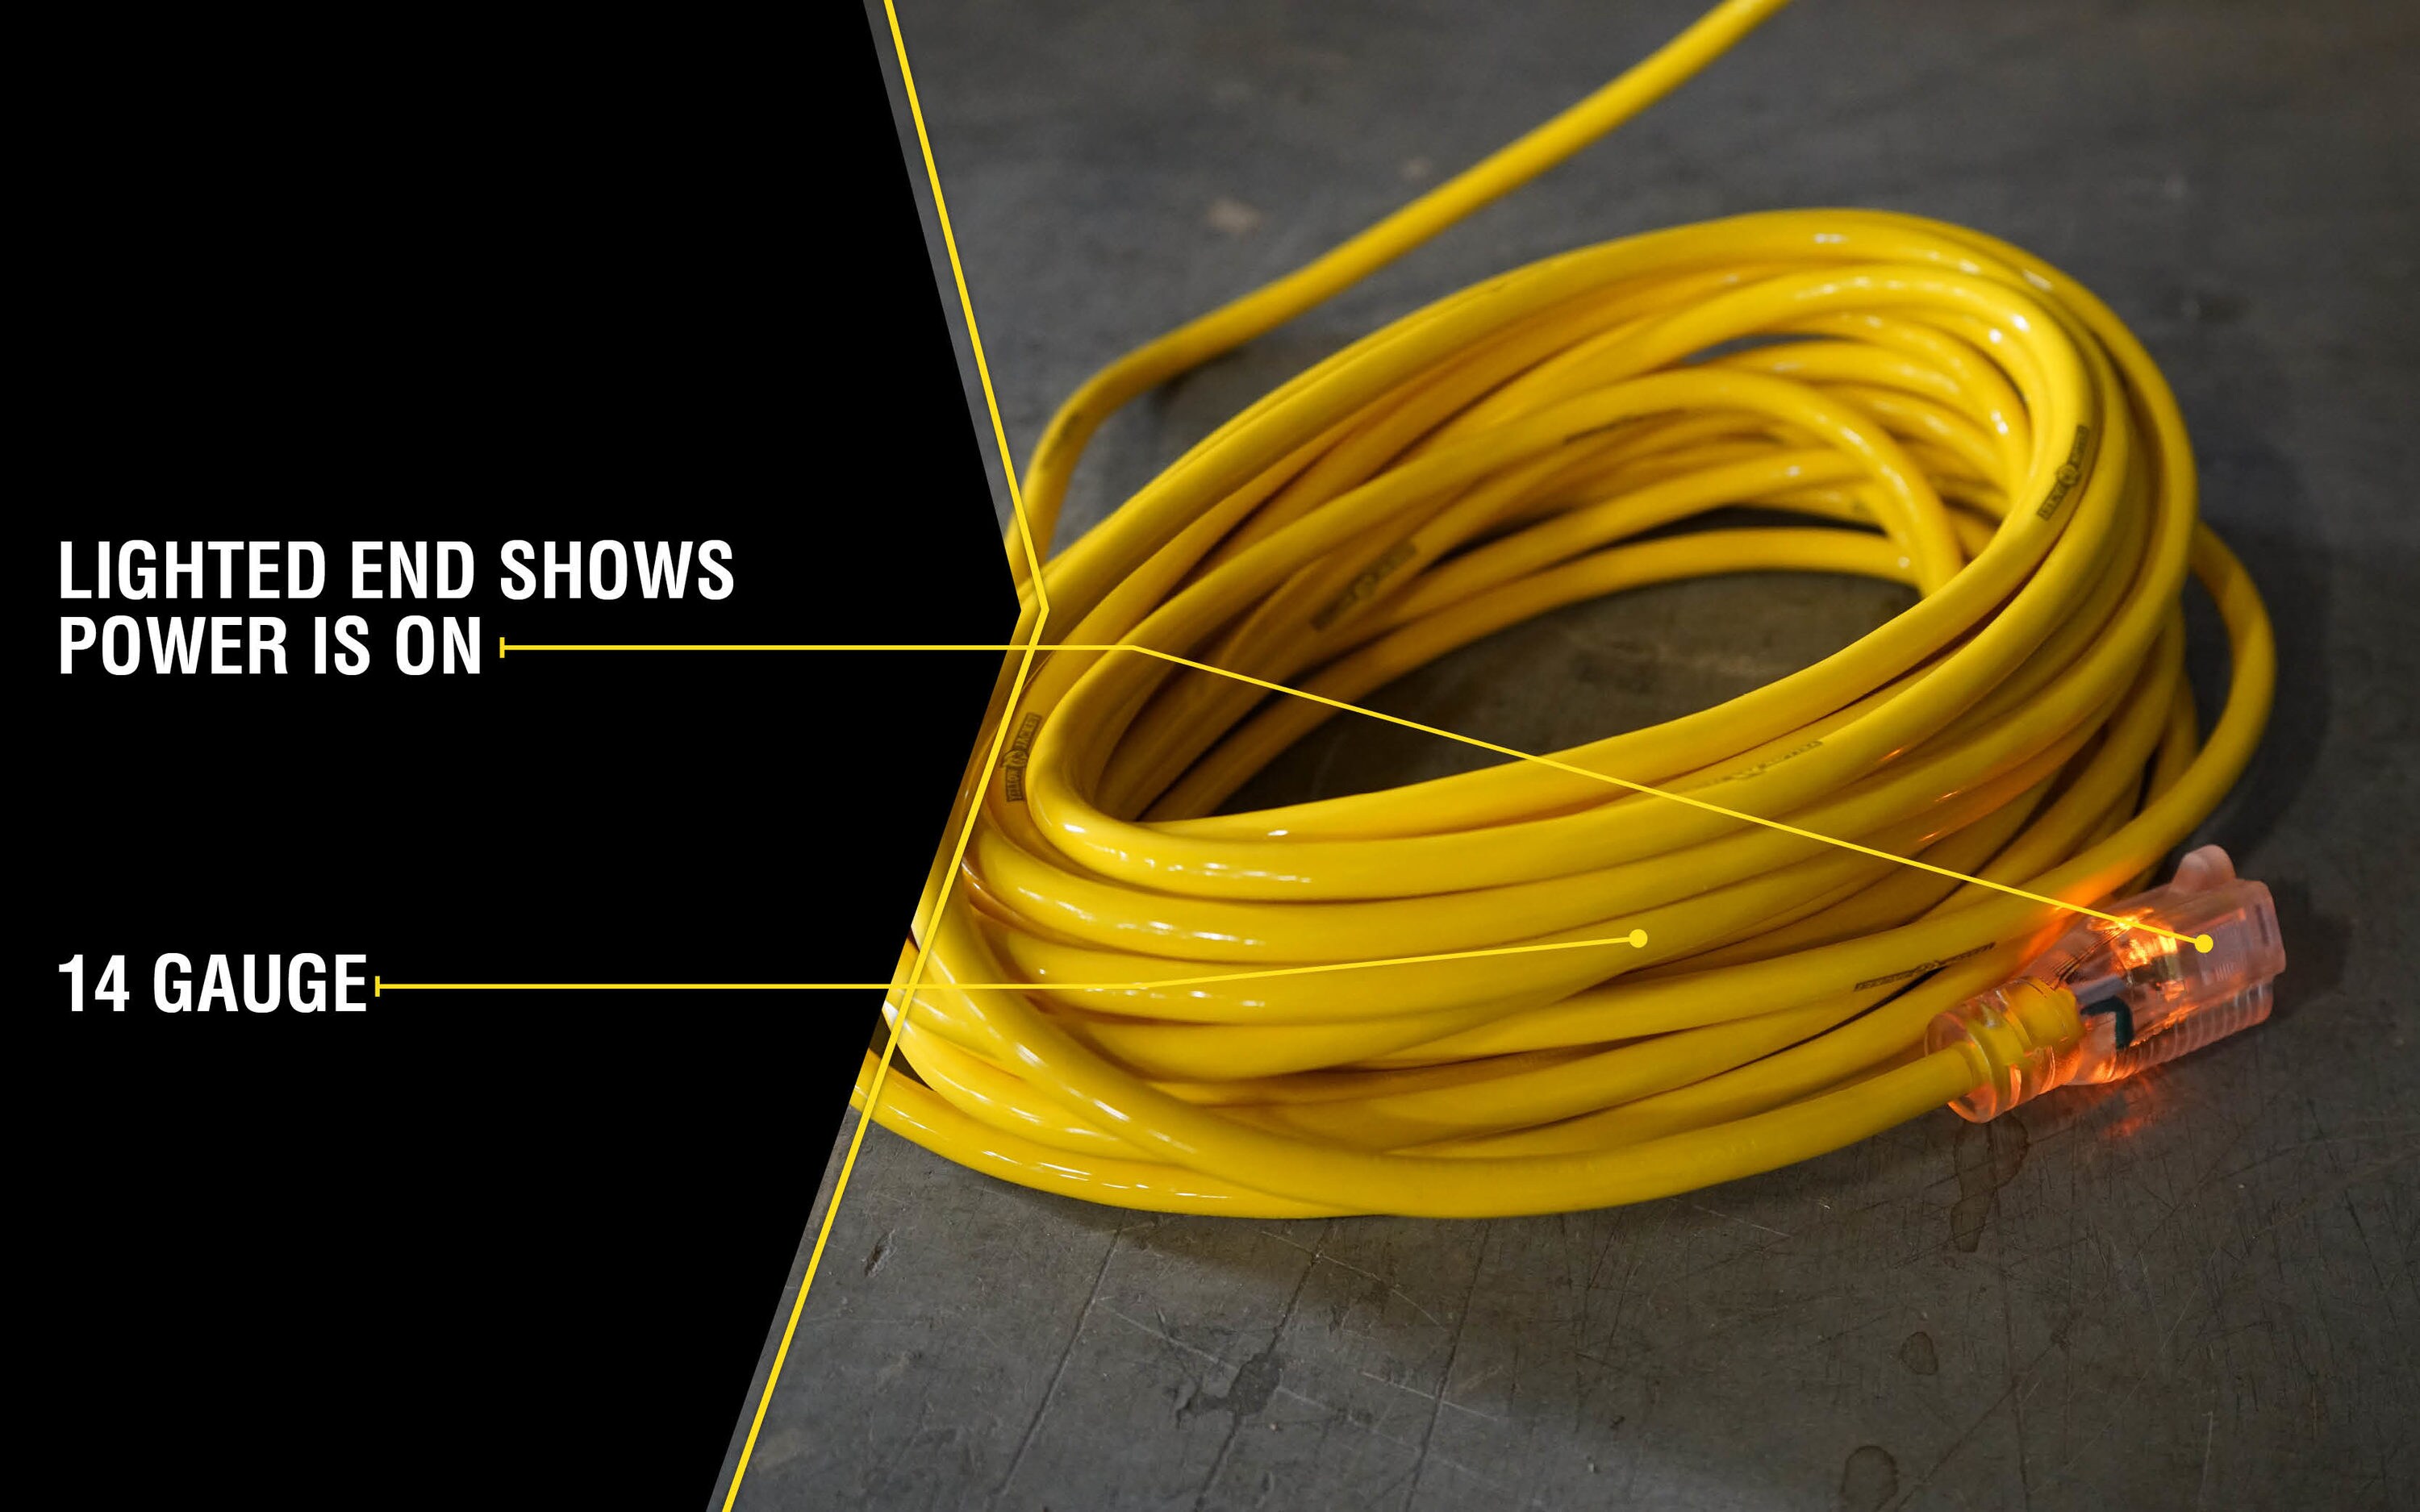 Stores Up To 150-Feet Of 16/3 Cord Woods 3202 CordWiz Extension Cord Holder Yellow 